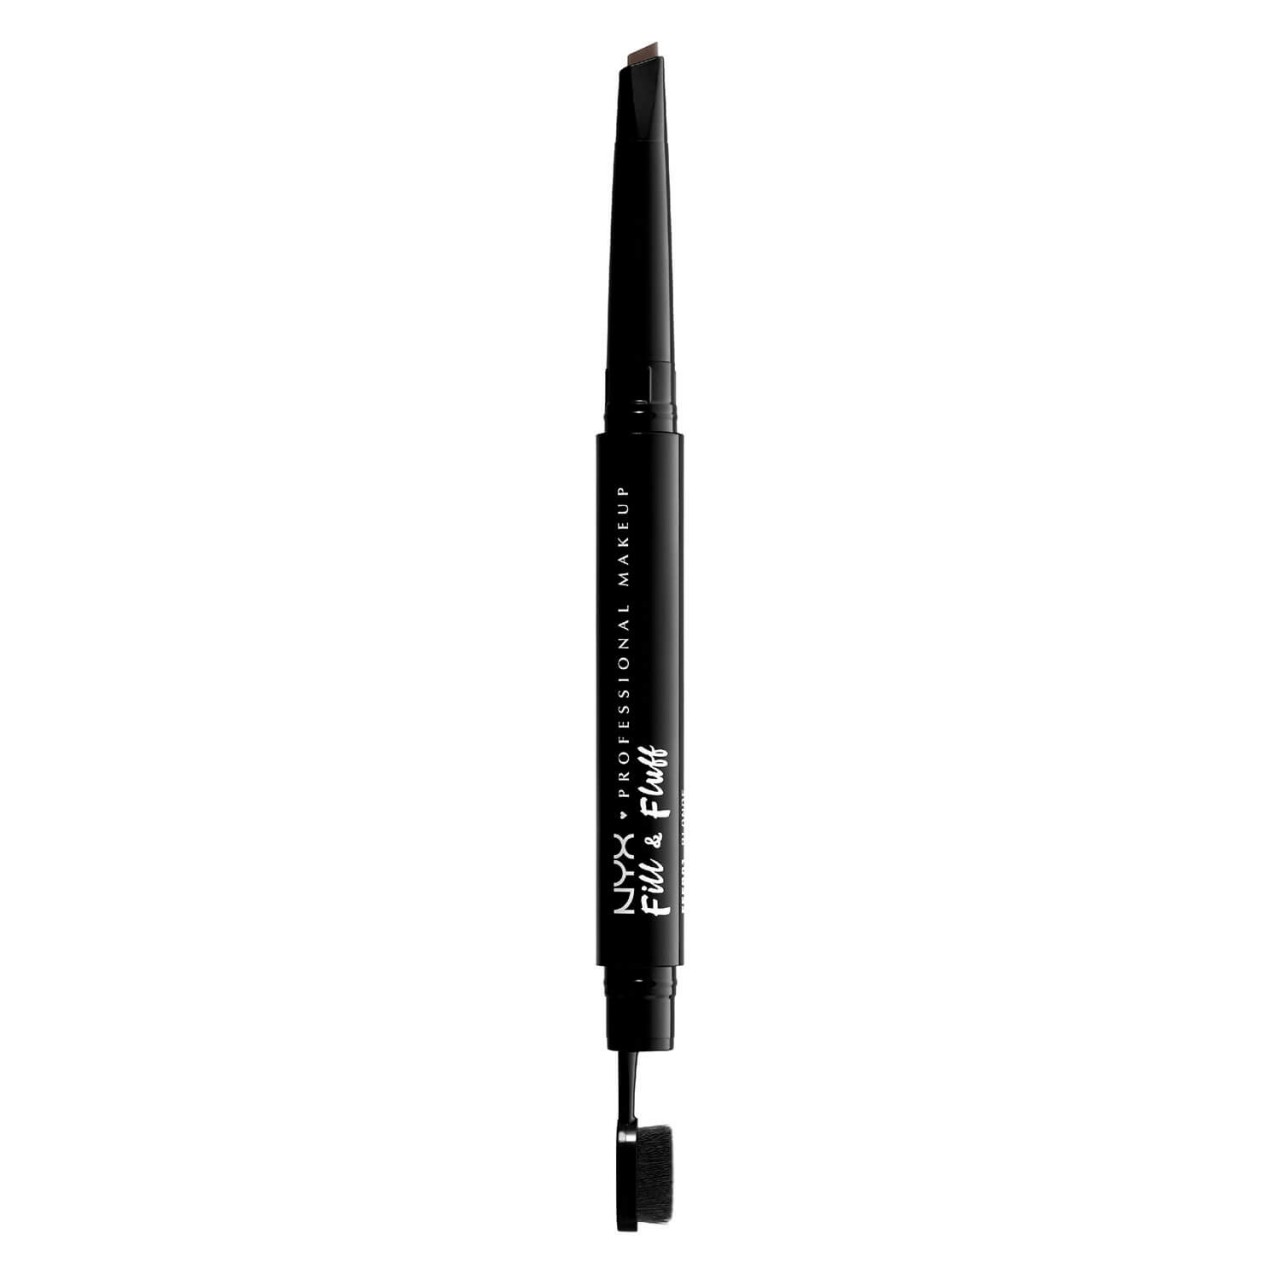 Fill & Fluff - Eyebrow Pomade Pencil Chocolate von NYX Professional Makeup